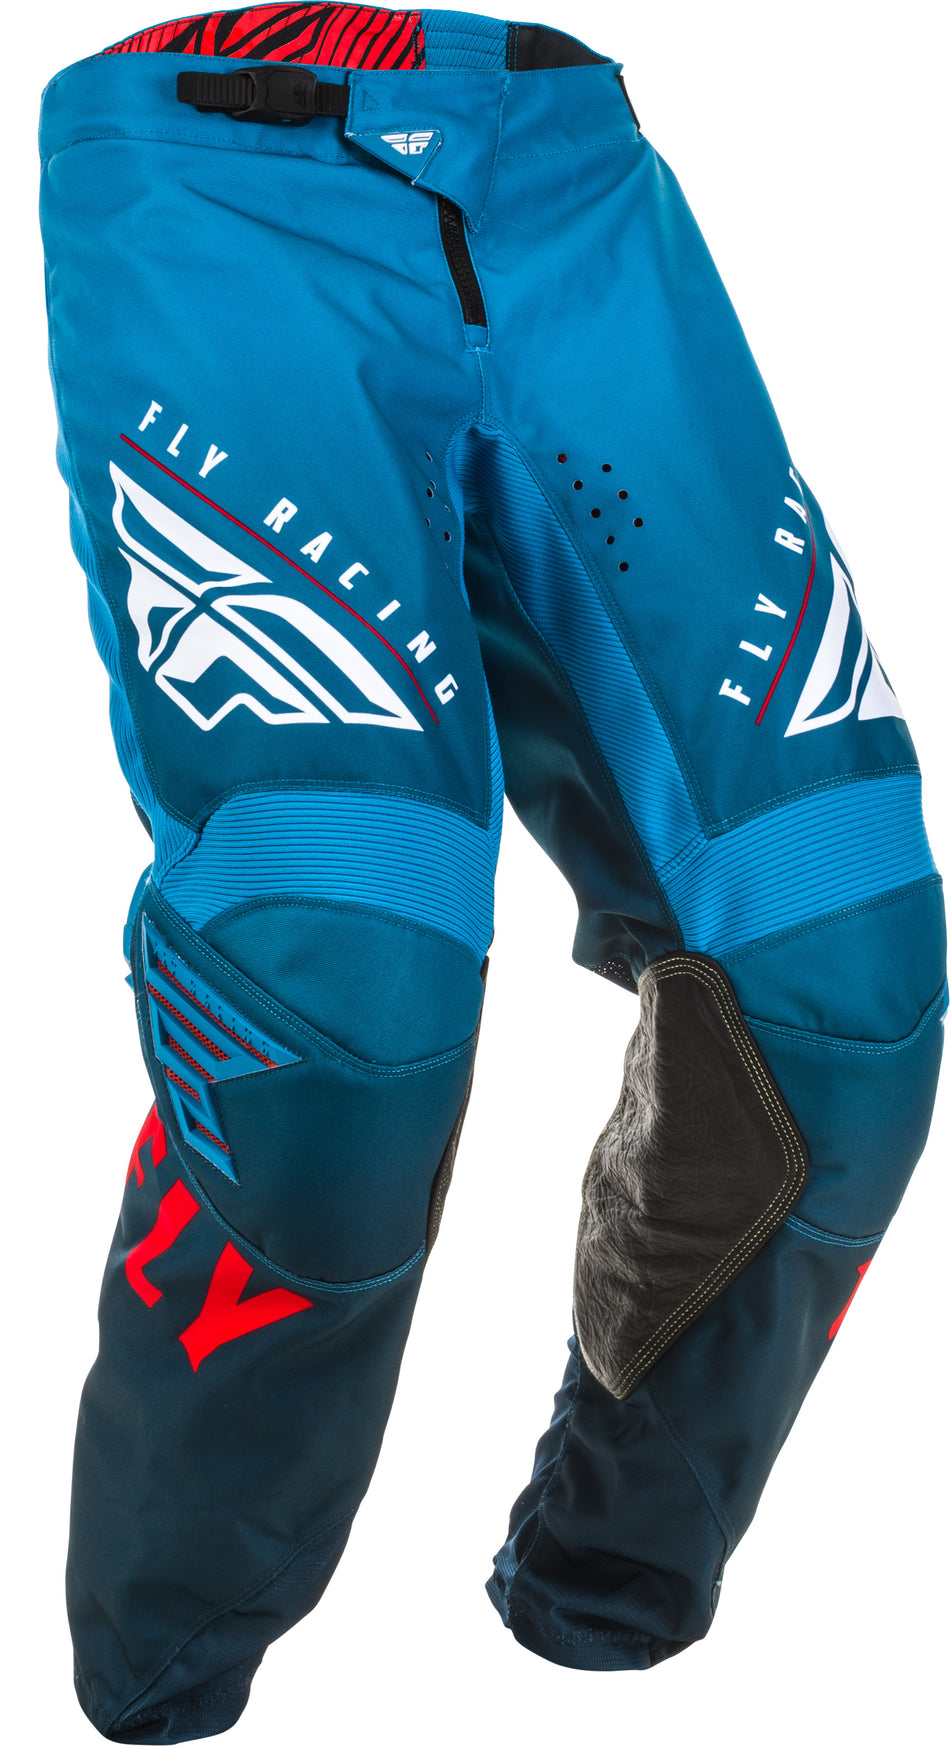 FLY RACING Kinetic K220 Pants Blue/White/Red Sz 18 373-53118